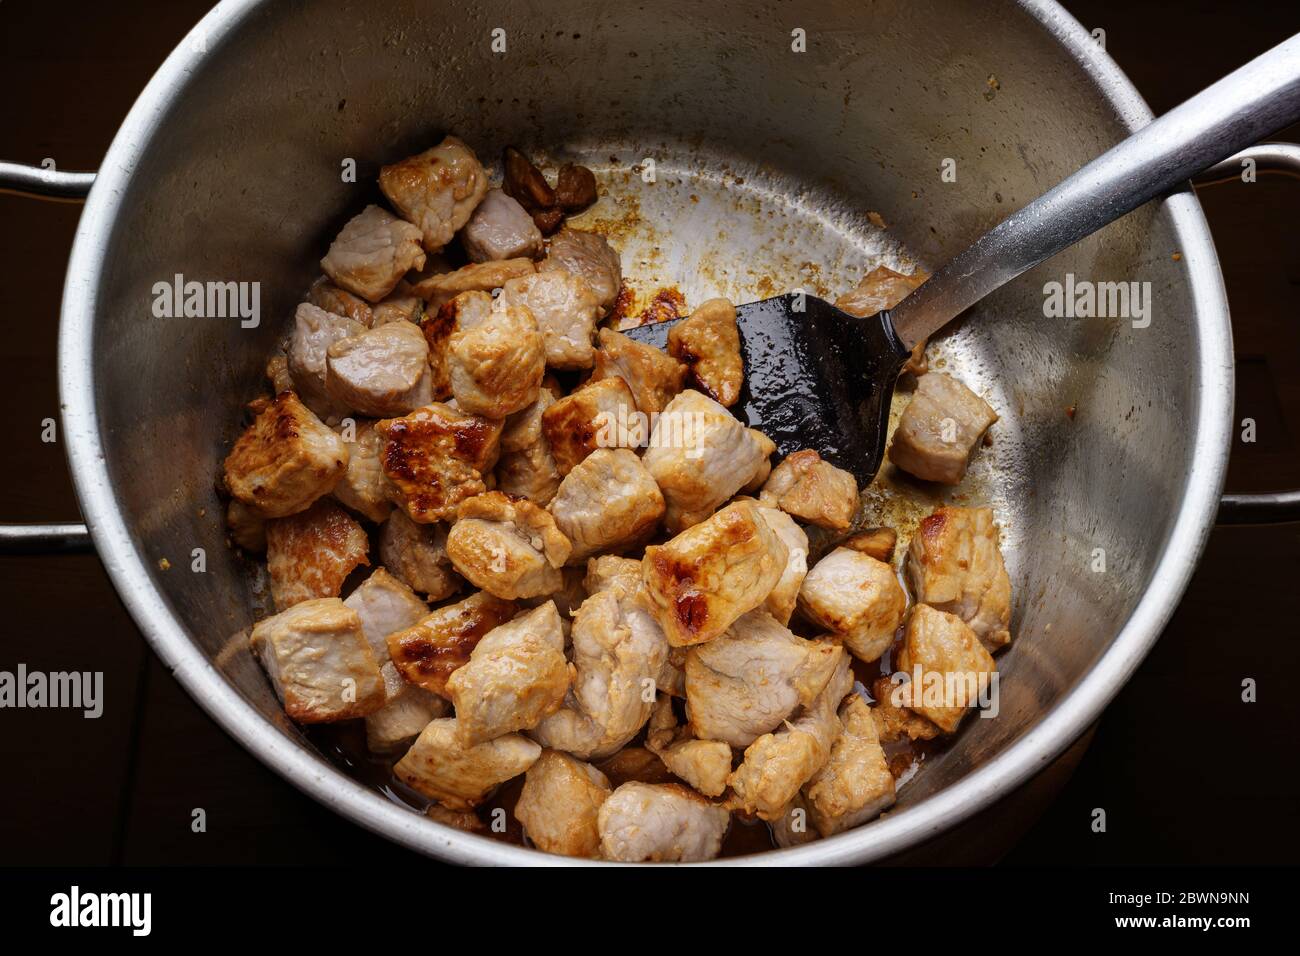 Pieces of pork meat are seared in a stainless steel pot to get roasted aroma for a hearty stew, goulash or ragout, homemade cooking concept Stock Photo